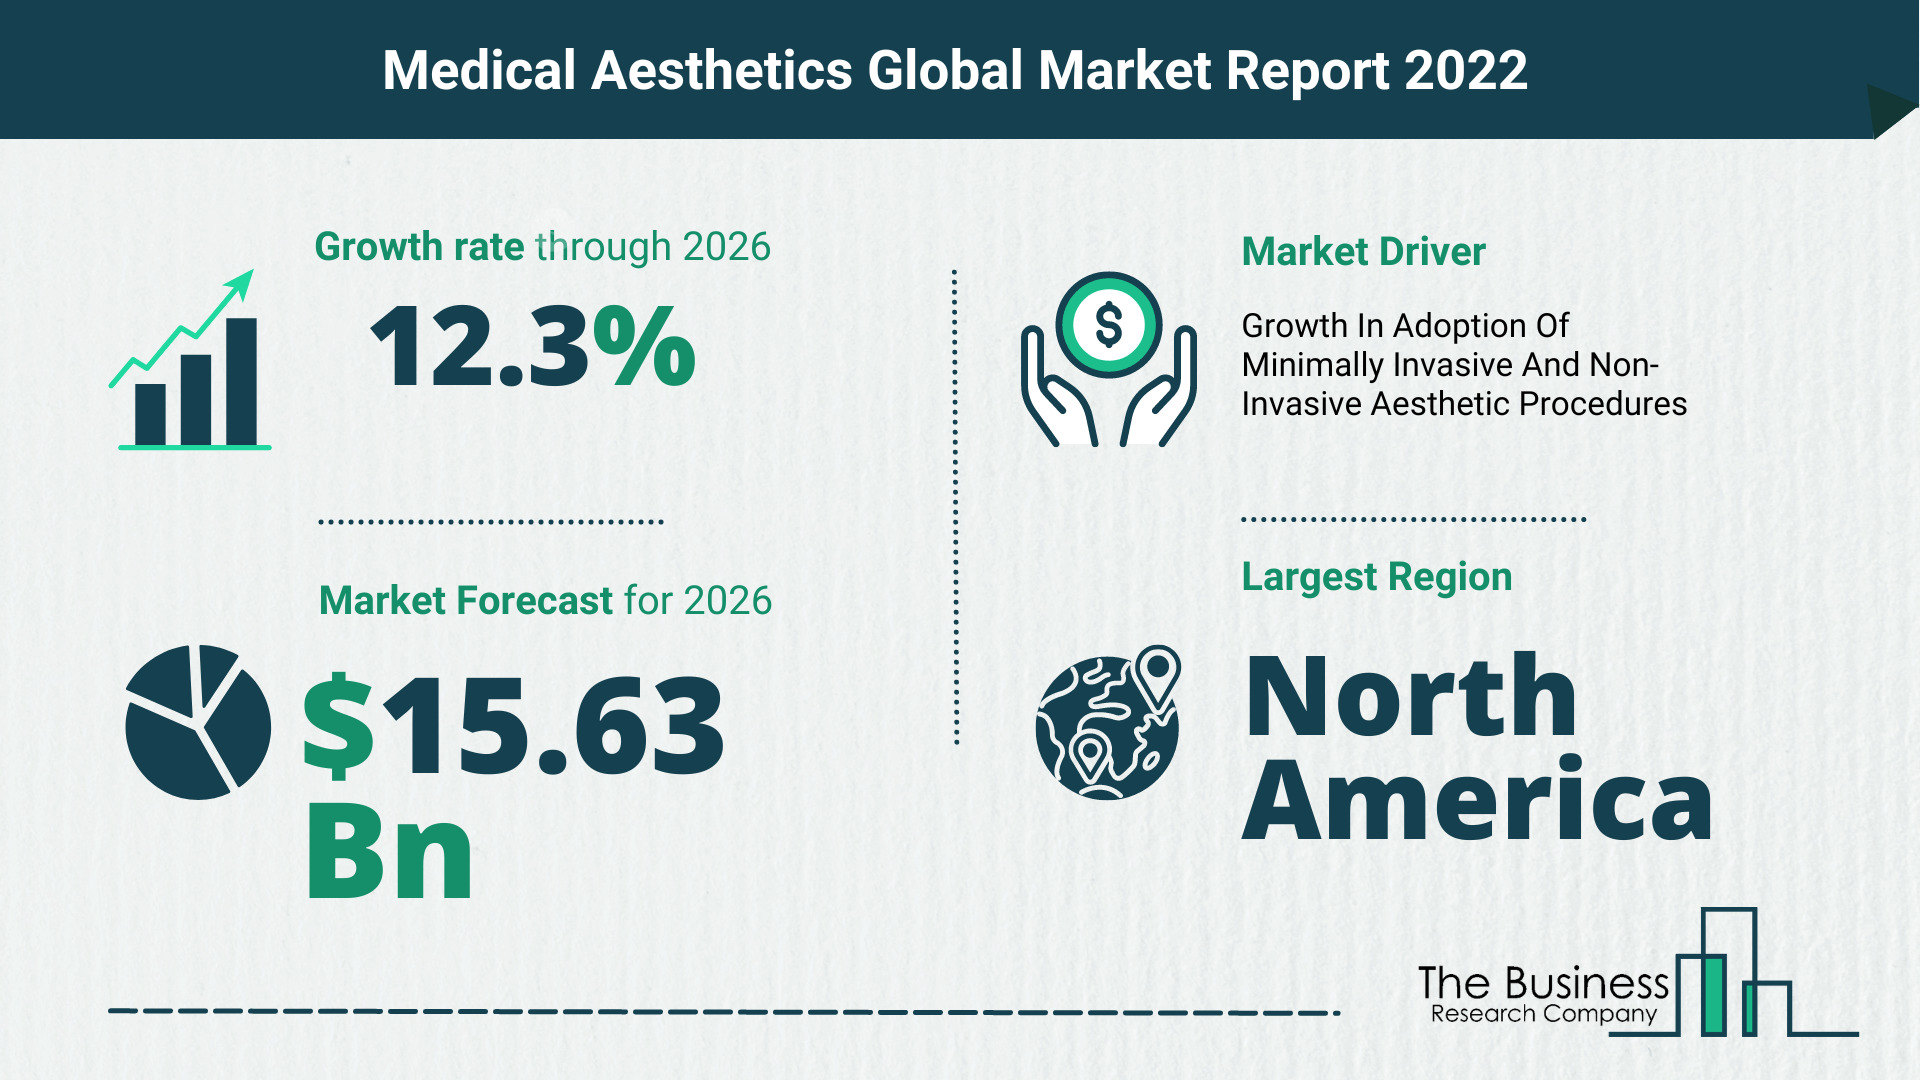 How Will The Medical Aesthetics Market Grow In 2022?